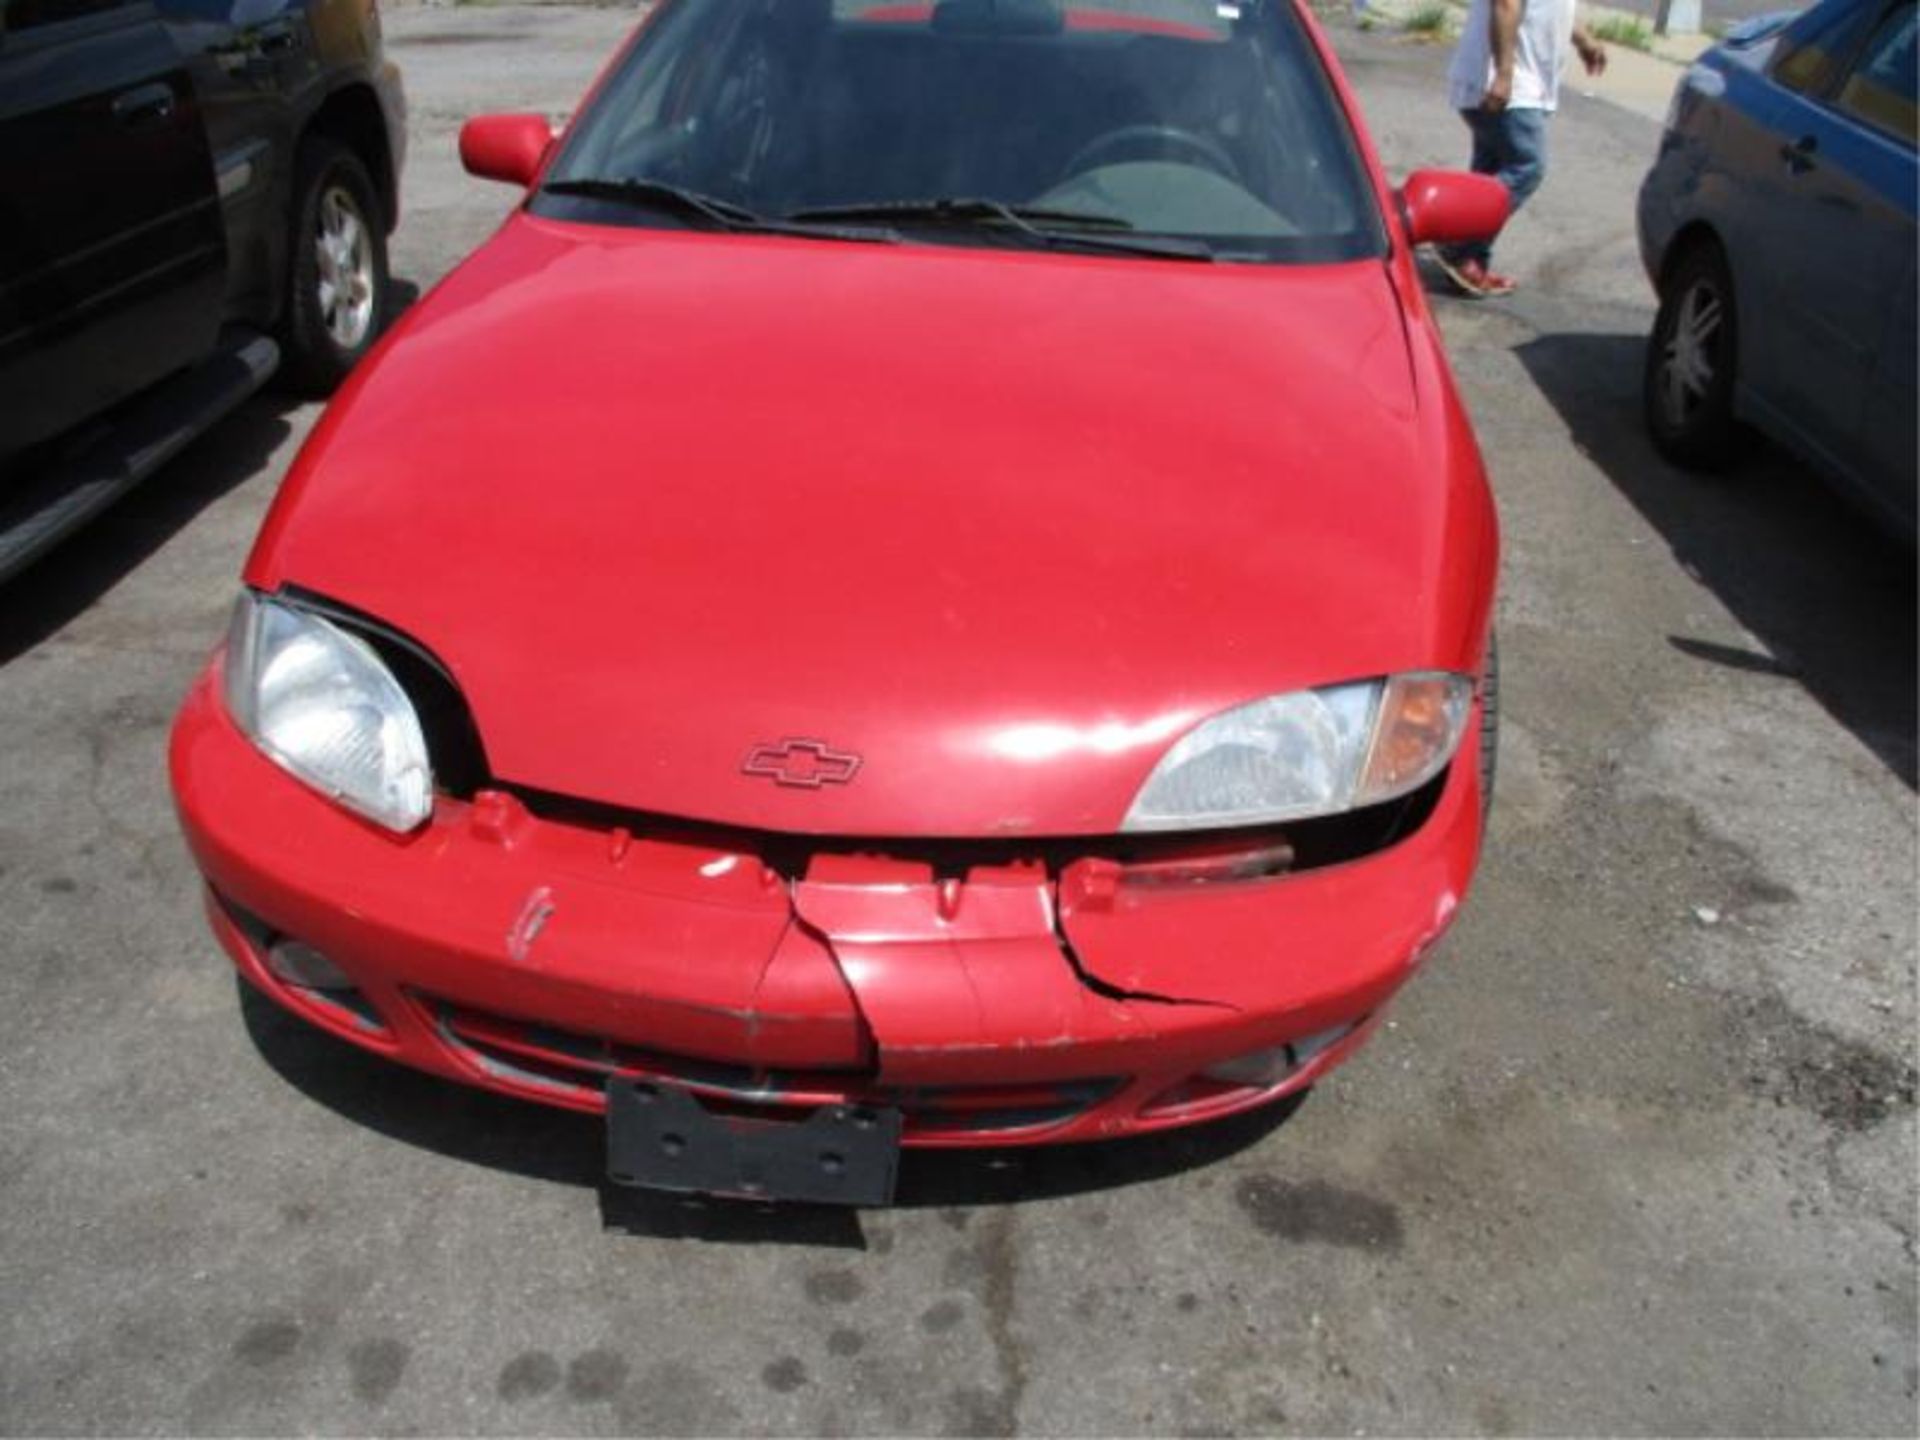 2002 Red Chevy Cavalier VIN:1G1JH52F227344735 - Image 2 of 13